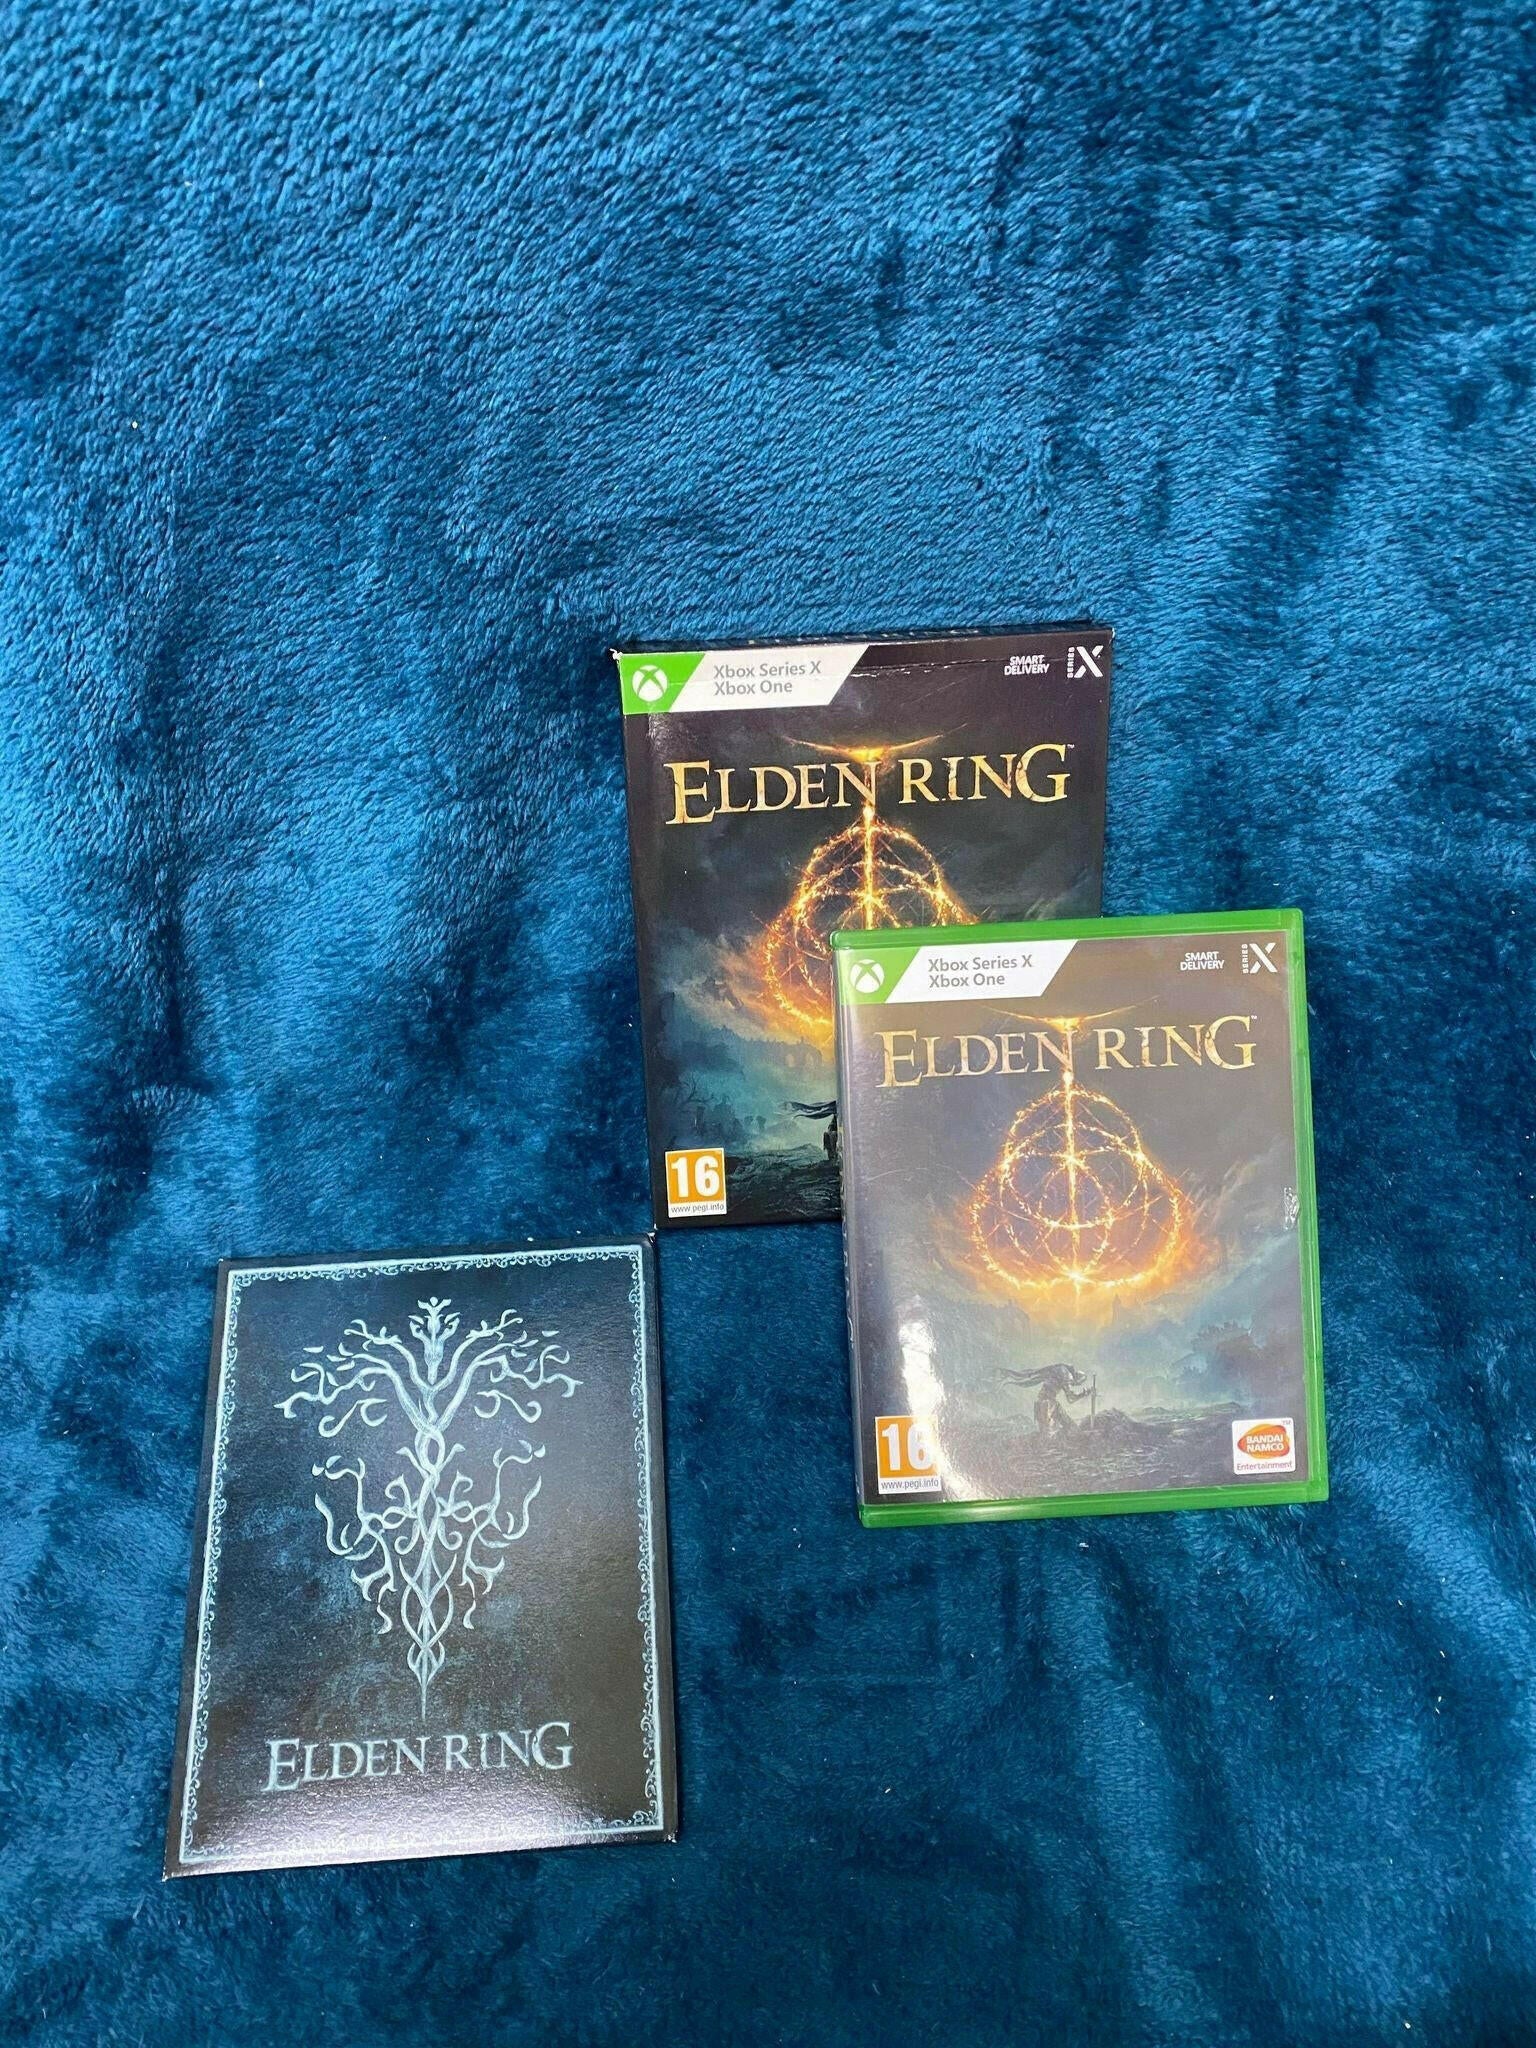 Xbox One Elden Ring Game and accessories